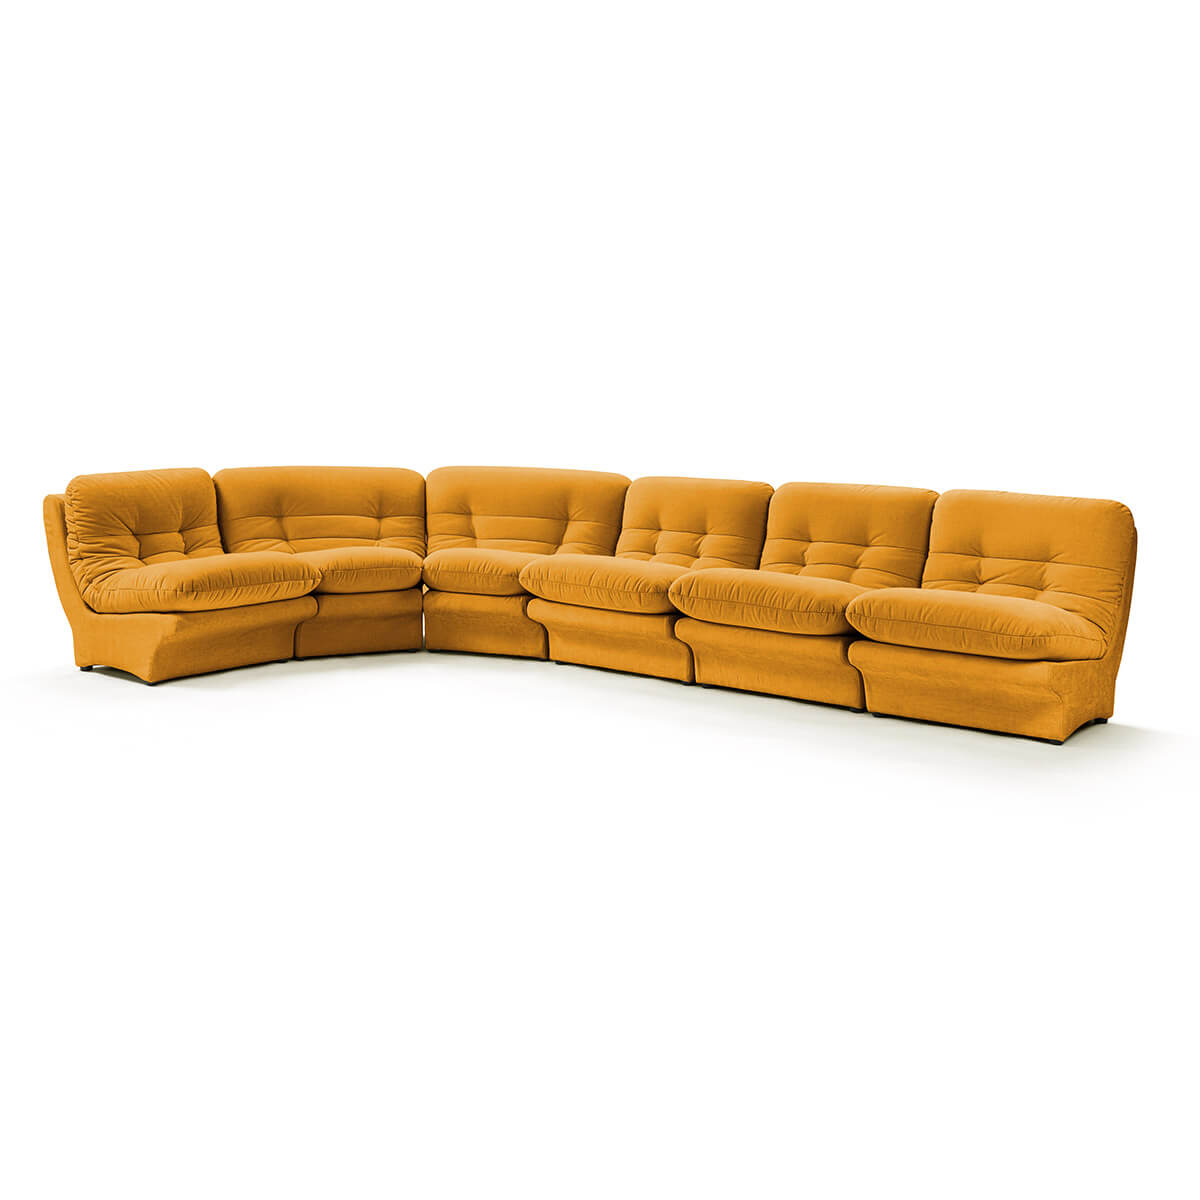 Carsons Mid Century Curved Modular Sectional Sofa / Combination 003 Chenille Helios-Mustard Yellow